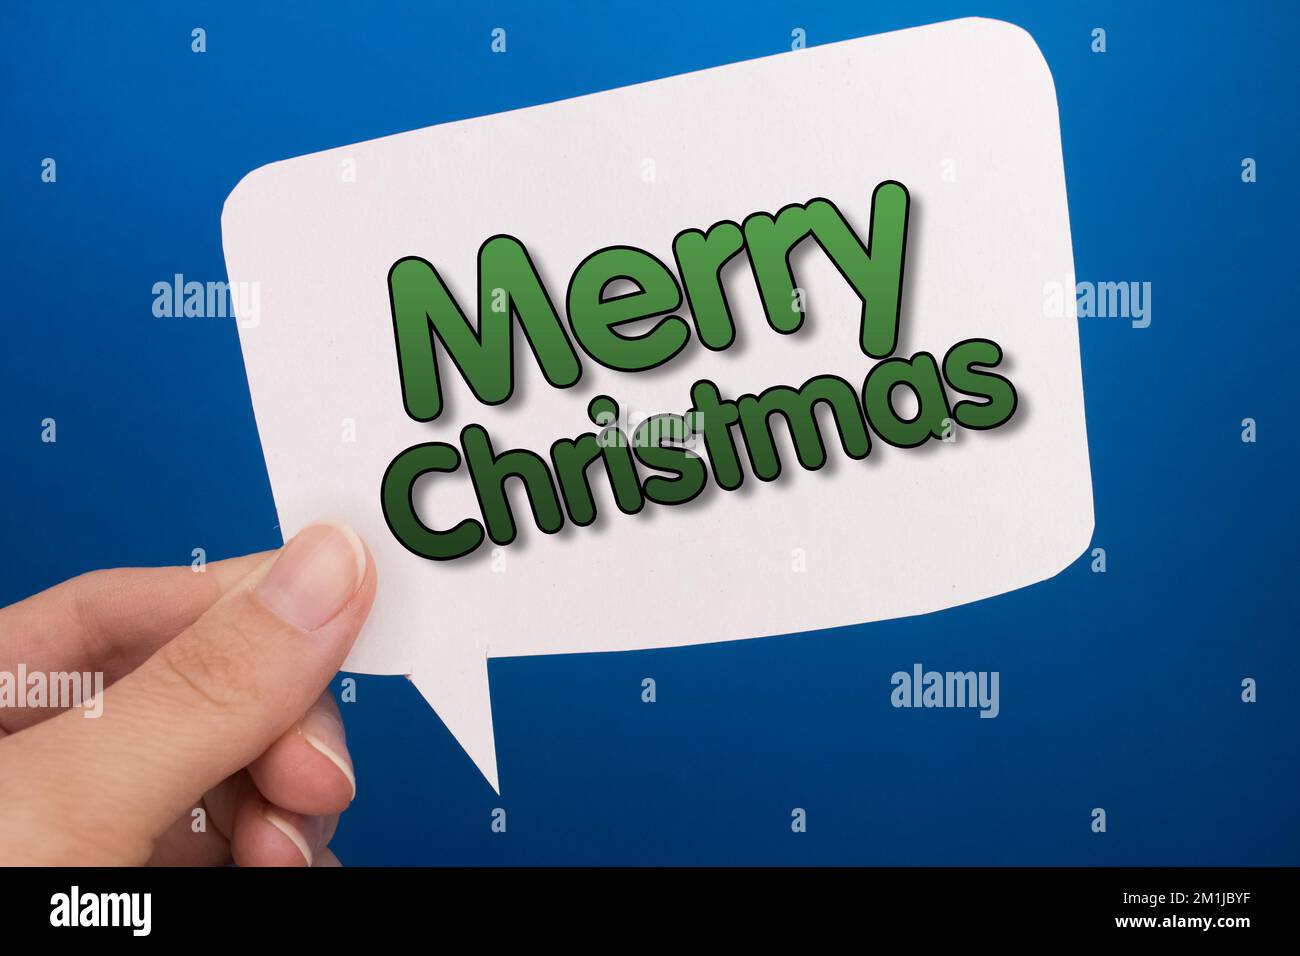 Speech bubble in front of colored background with Merry Christmas text. Stock Photo